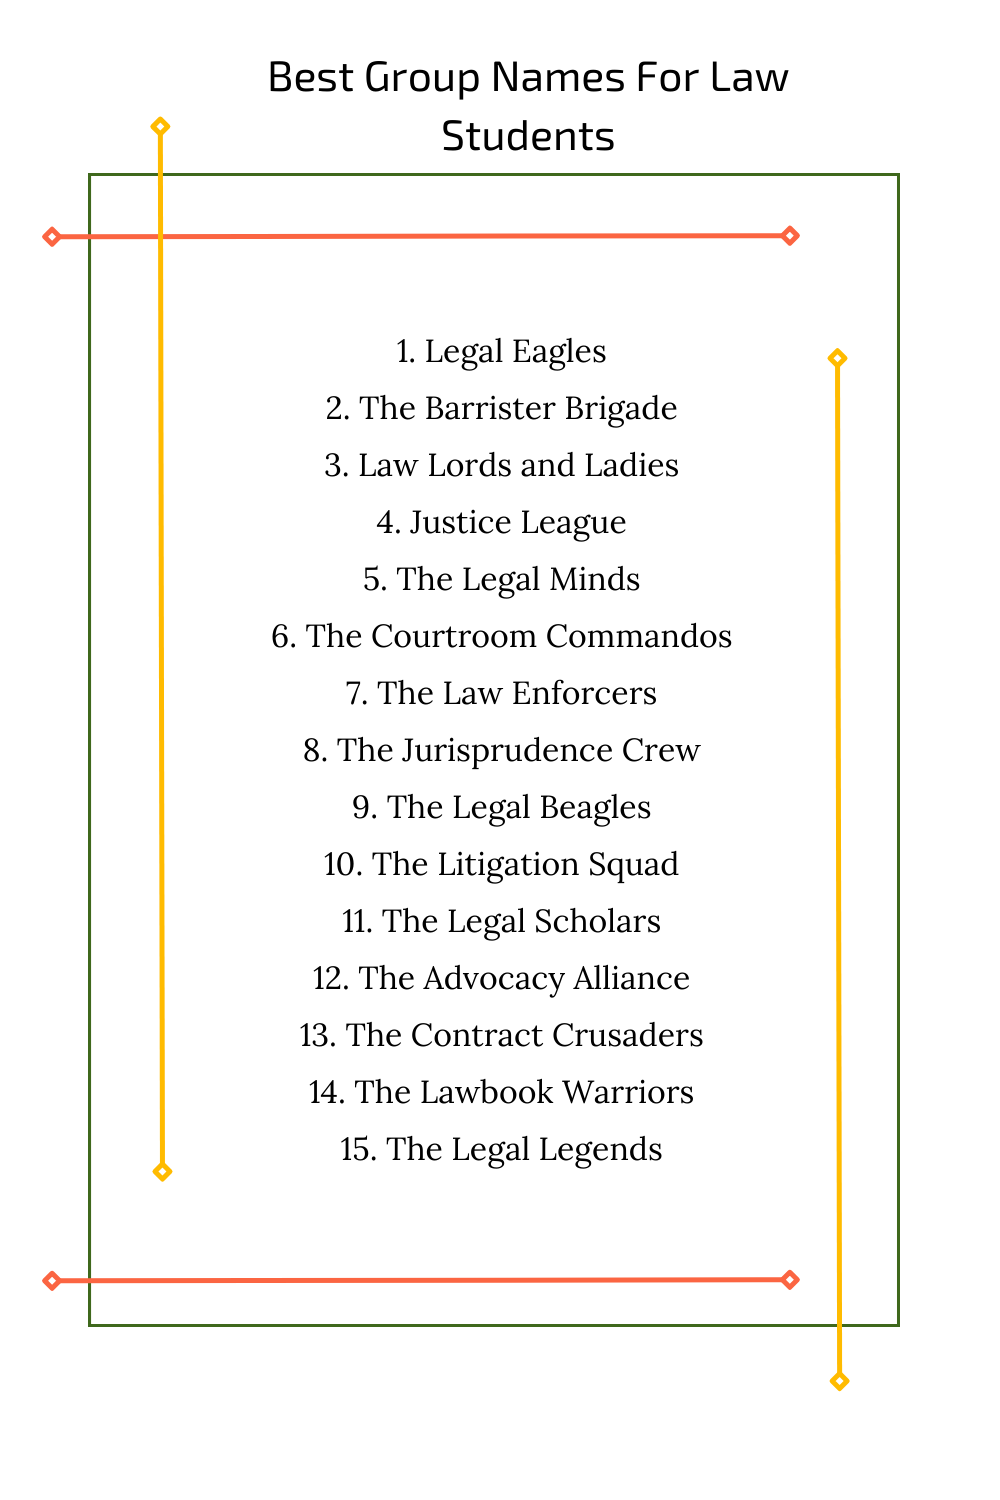 Best Group Names For Law Students